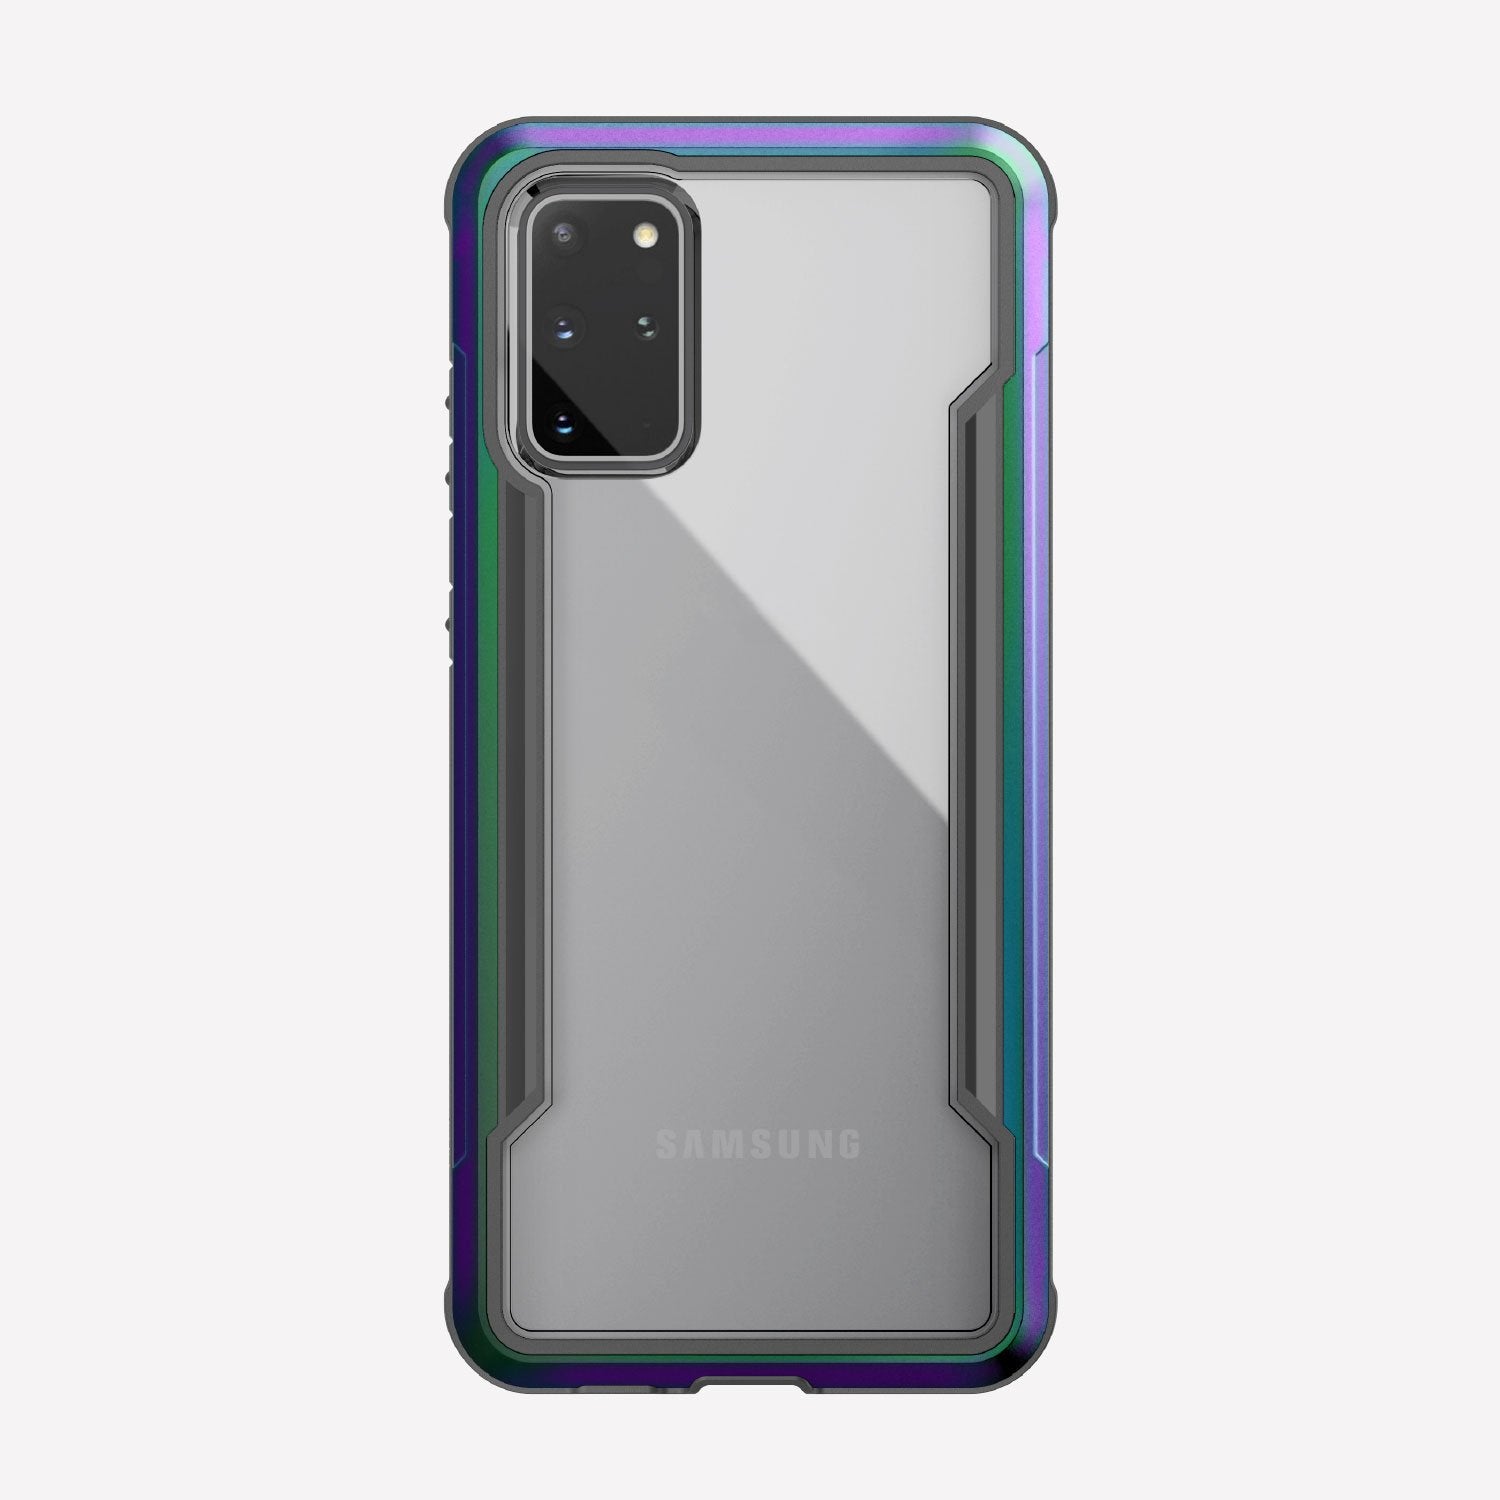 Defense shield iridescent with a silver Galaxy S20+ in it showing the back view with the iridescent color on the back panel and that it's transparent